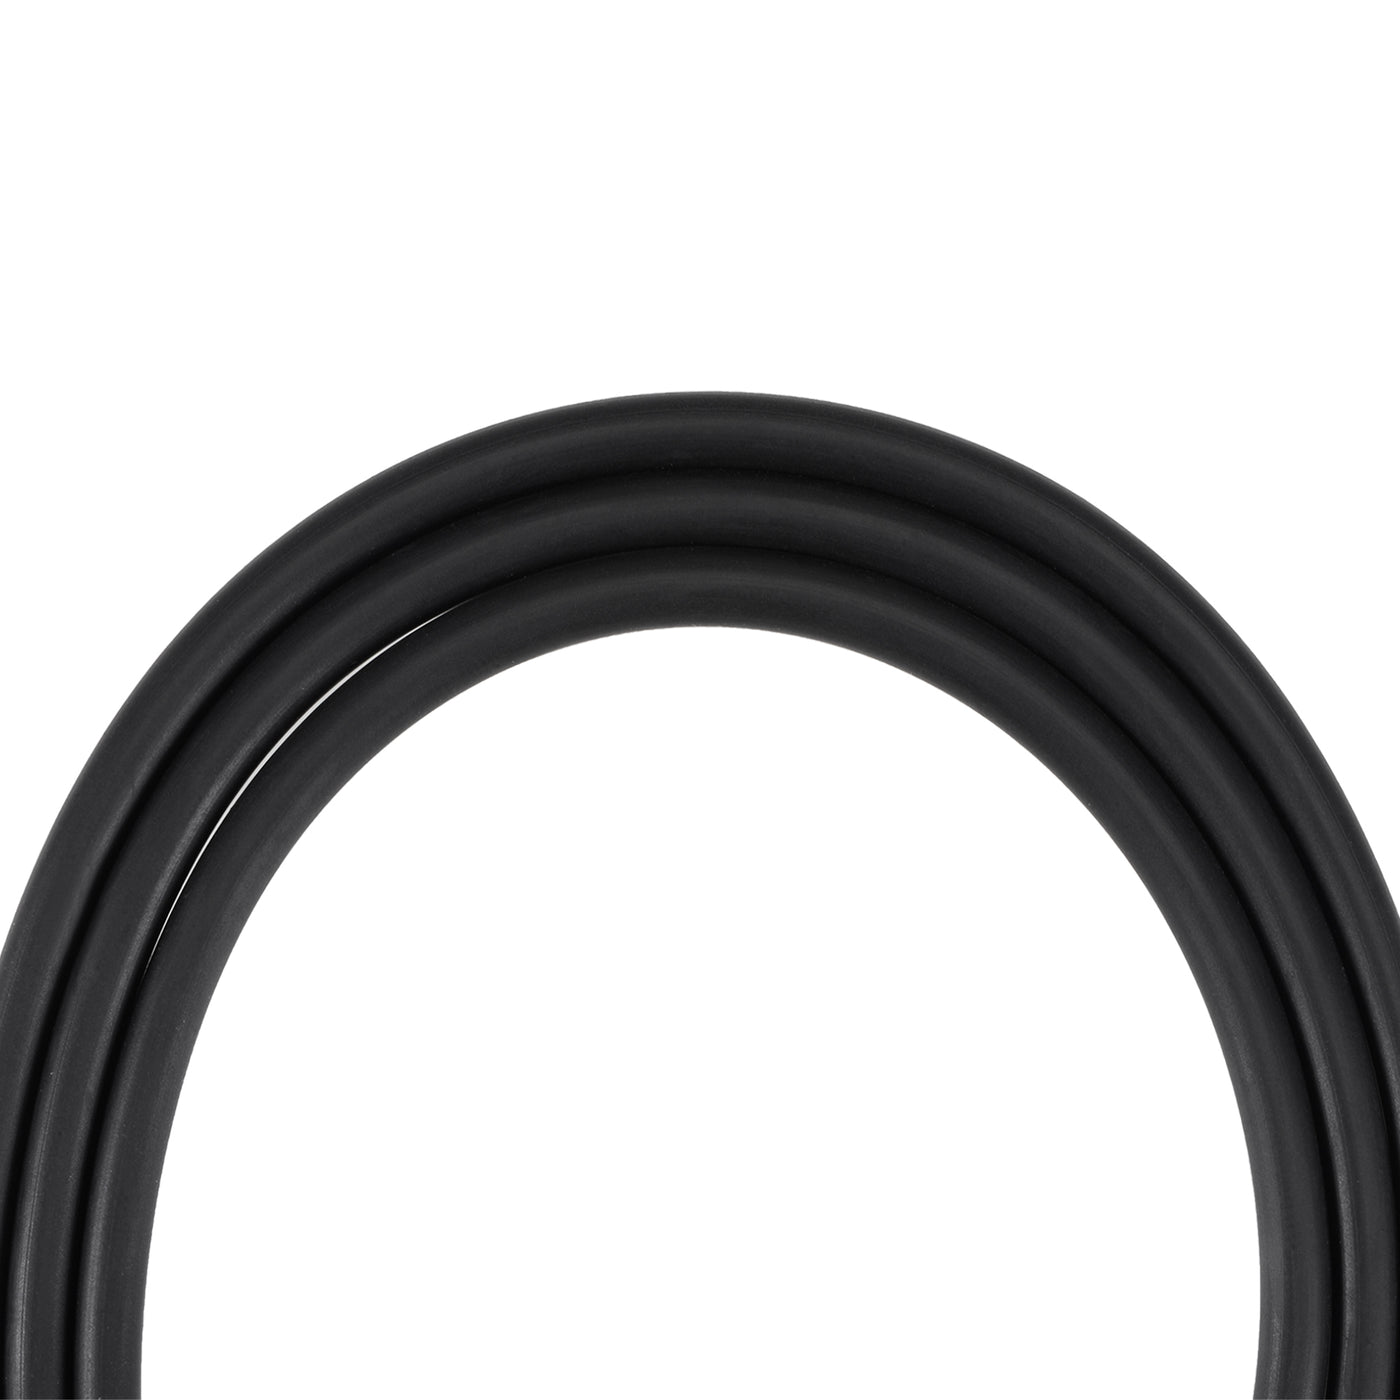 Uxcell Uxcell Fuel Line Hose 19mm ID 25mm OD 3.3ft Oil Line Fuel Pipe Rubber Water Hose Black